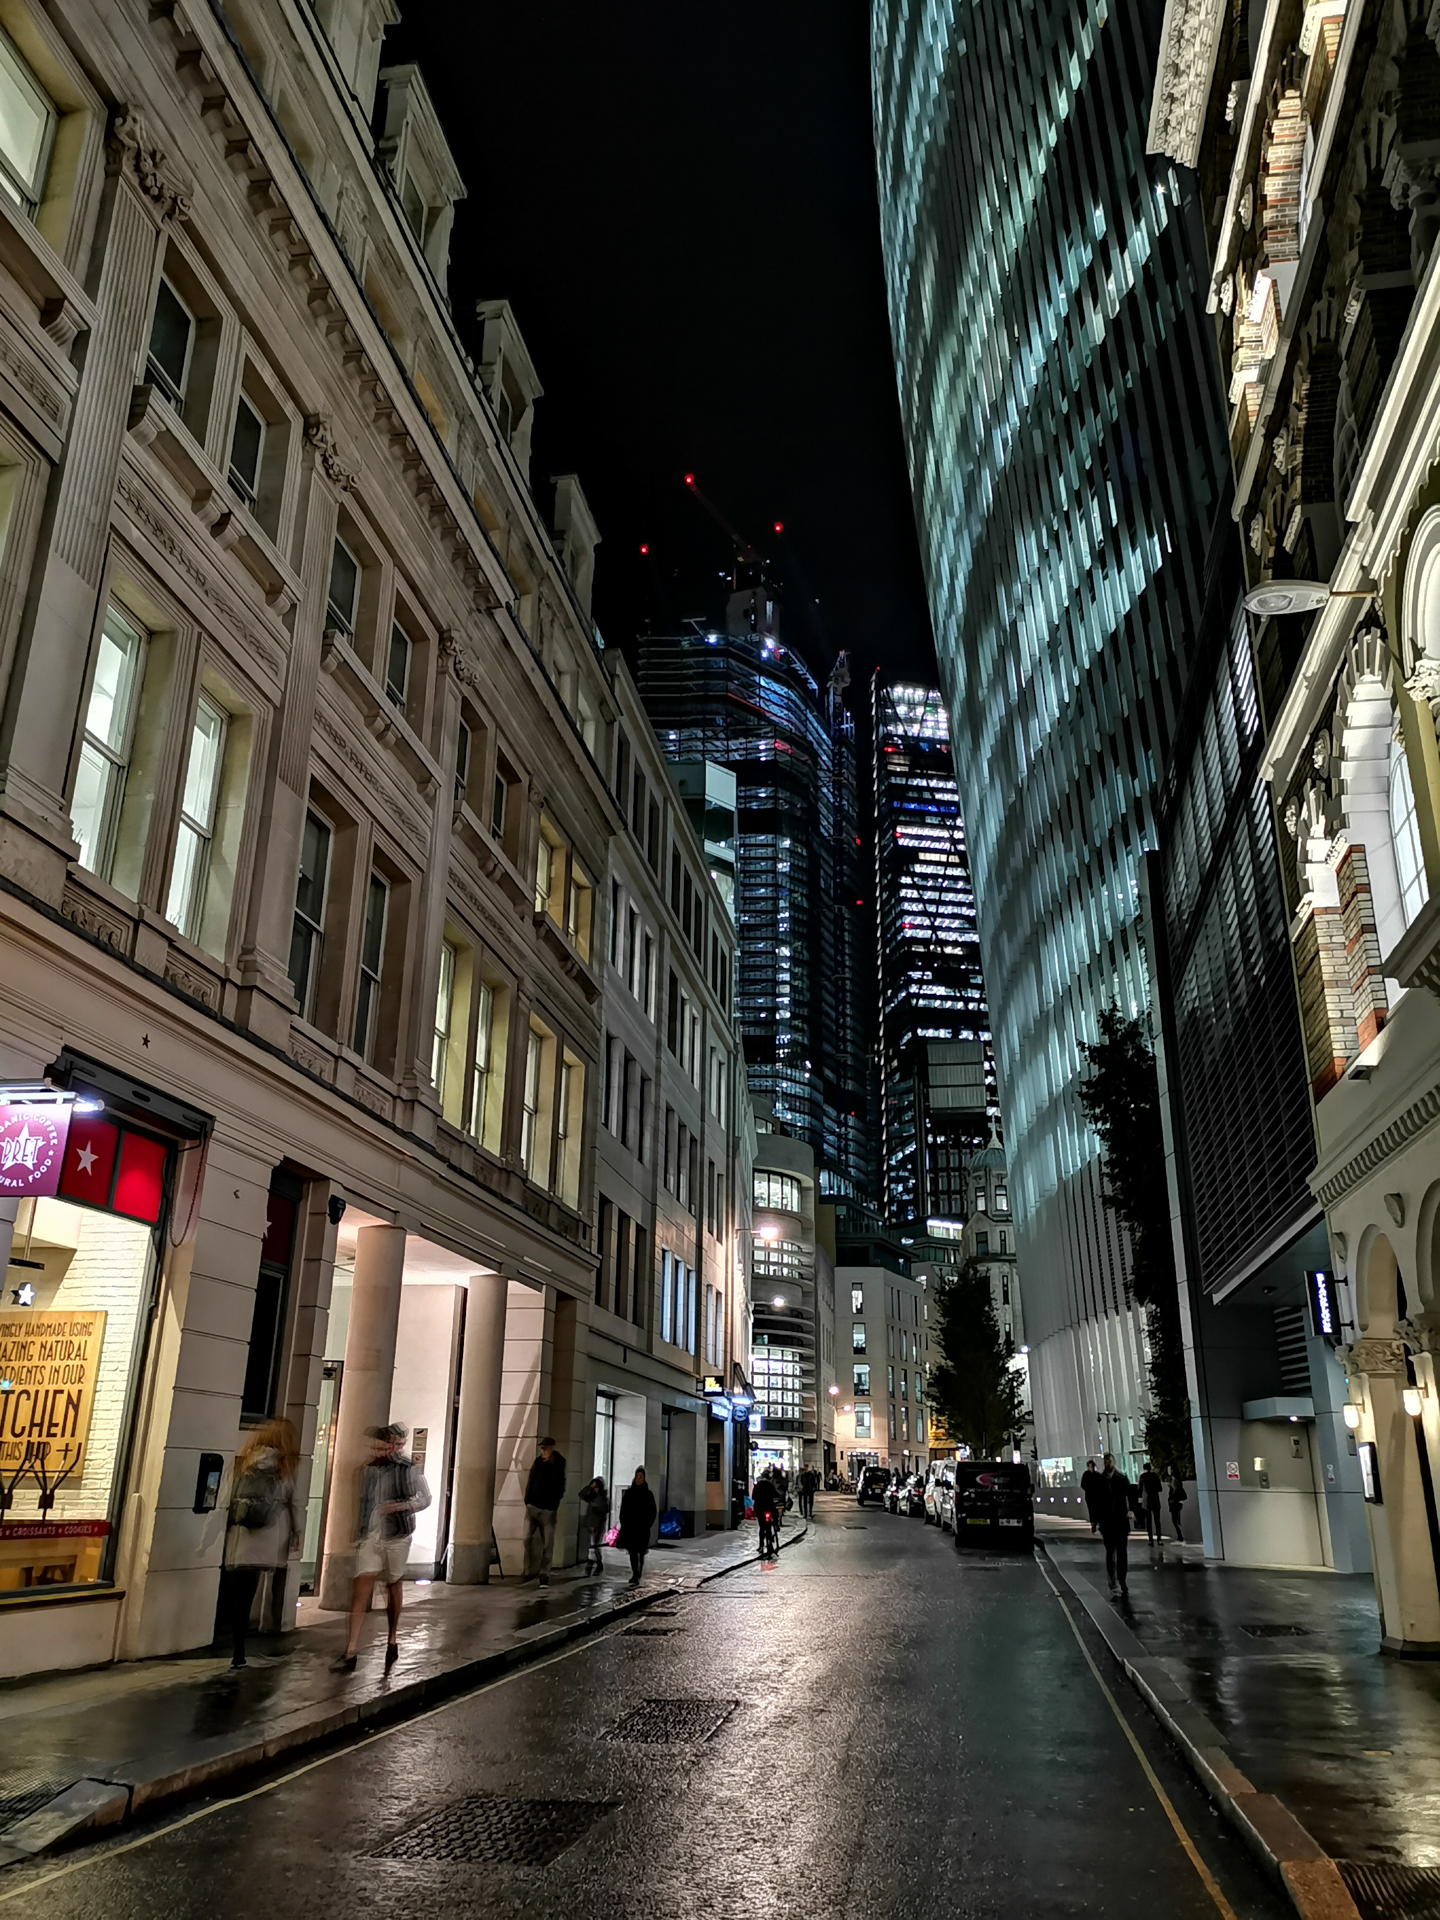 Night picture sample with HUAWEI Mate 20 Pro back camera